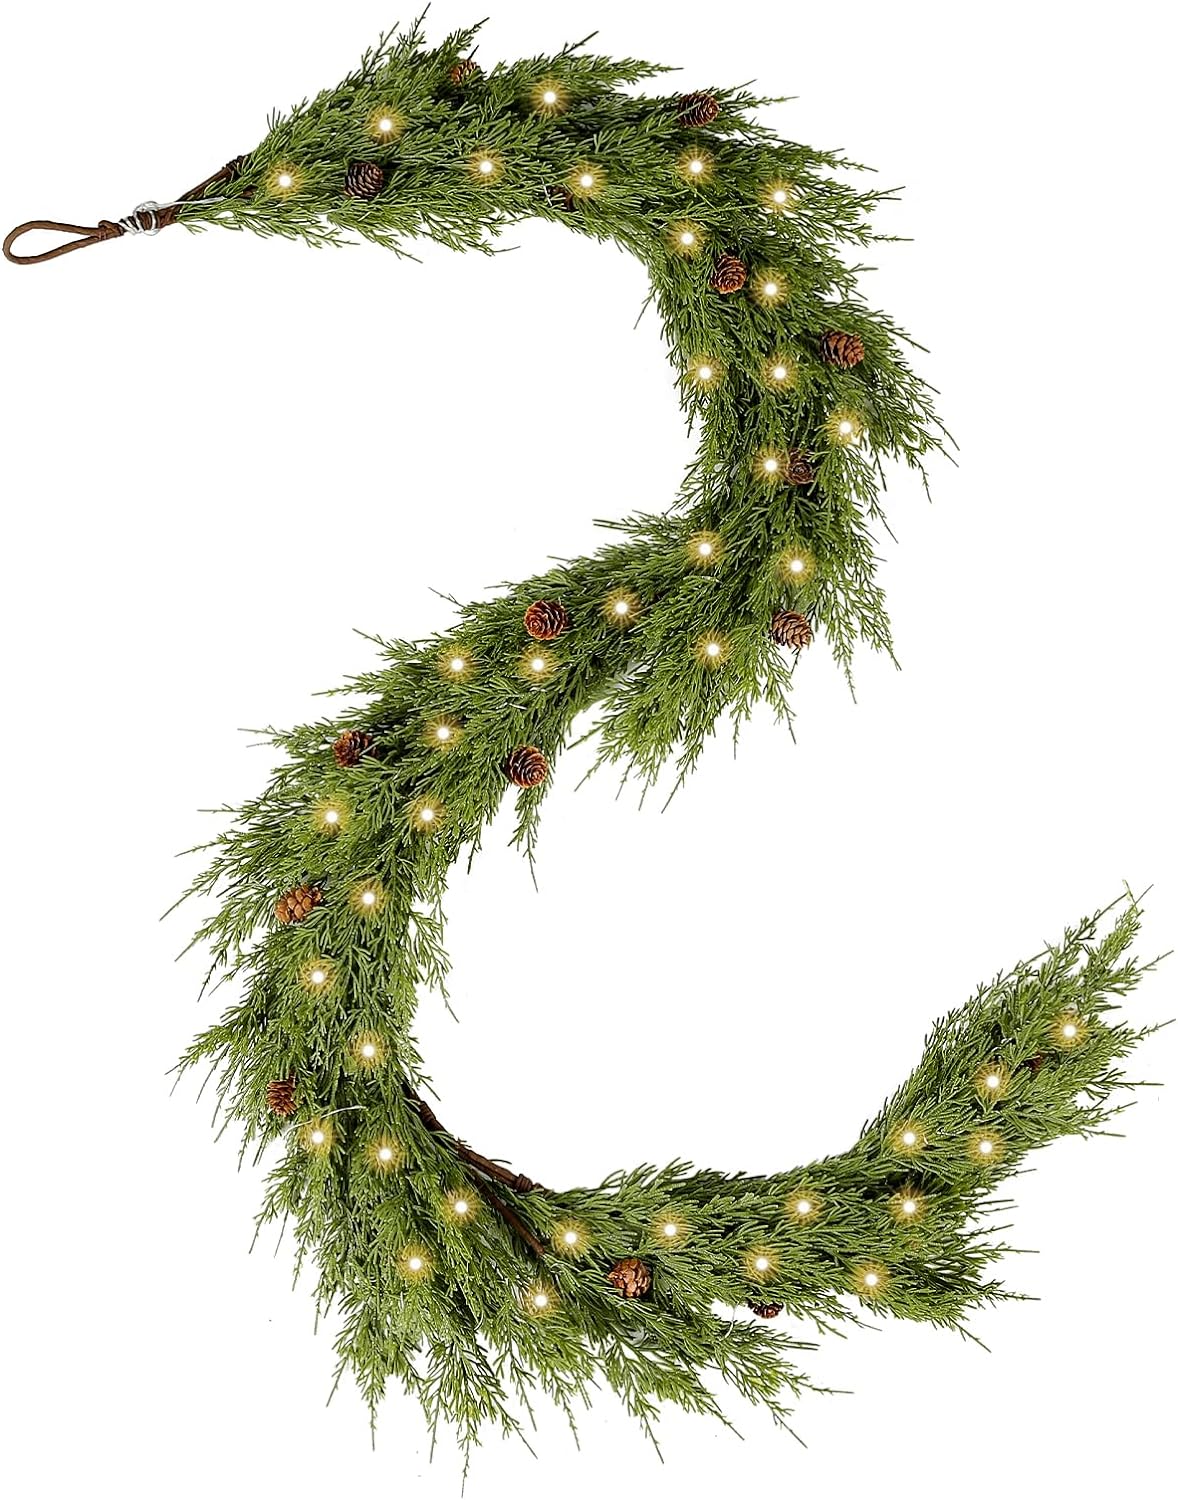 A cedar garland intertwined with pine needles and adorned with pine cones, creating a festive Christmas decoration.